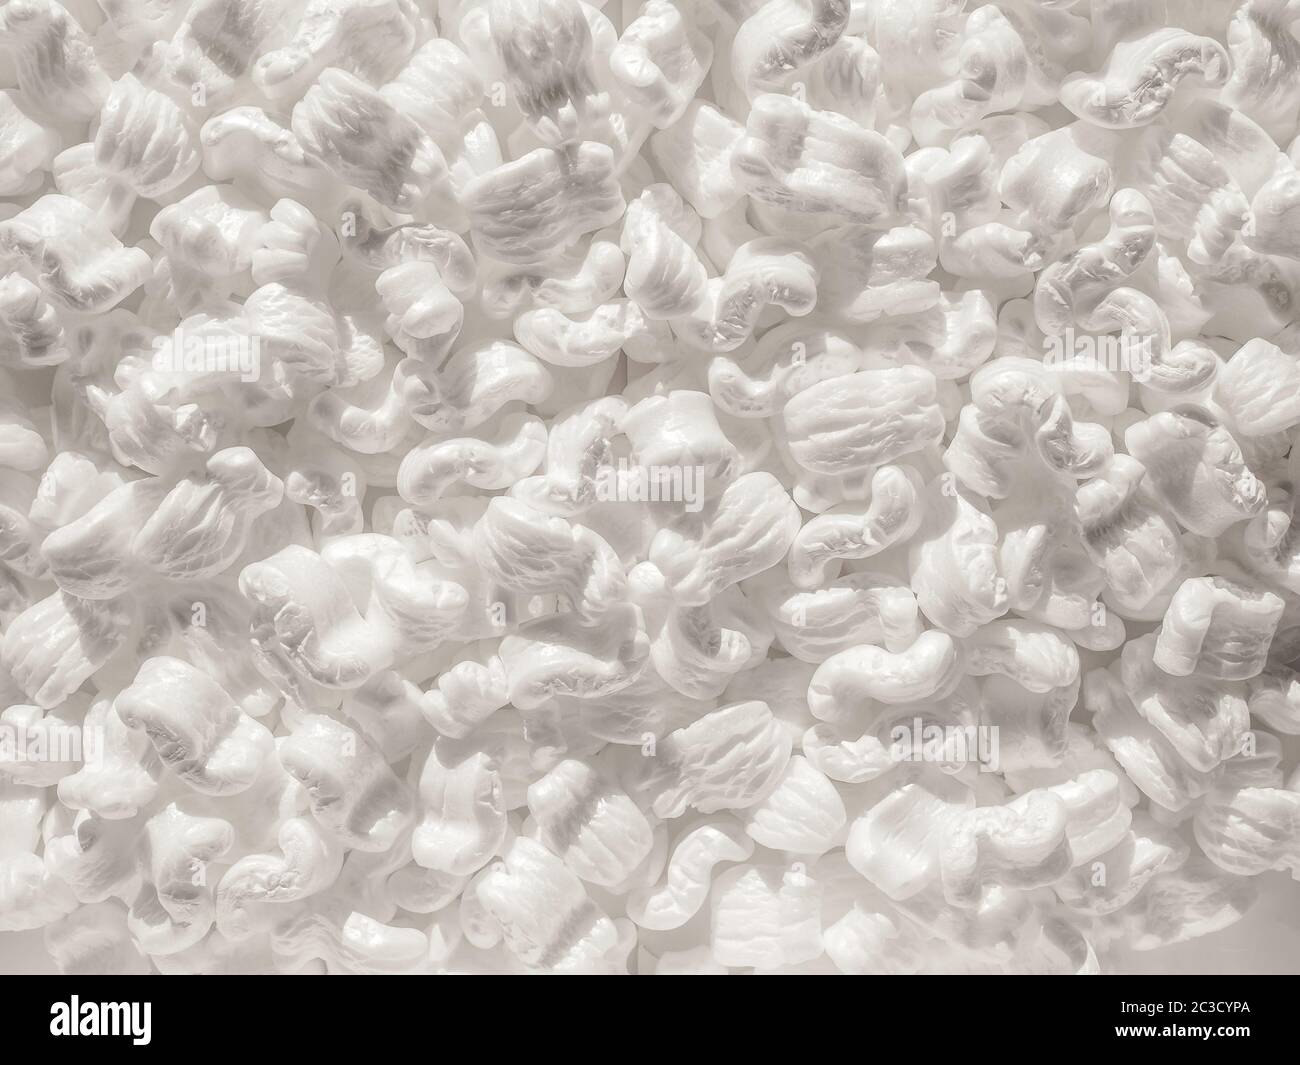 Hand Holding White Polystyrene Foam Beads Stock Photo - Download Image Now  - Abstract, Bead, Black Color - iStock